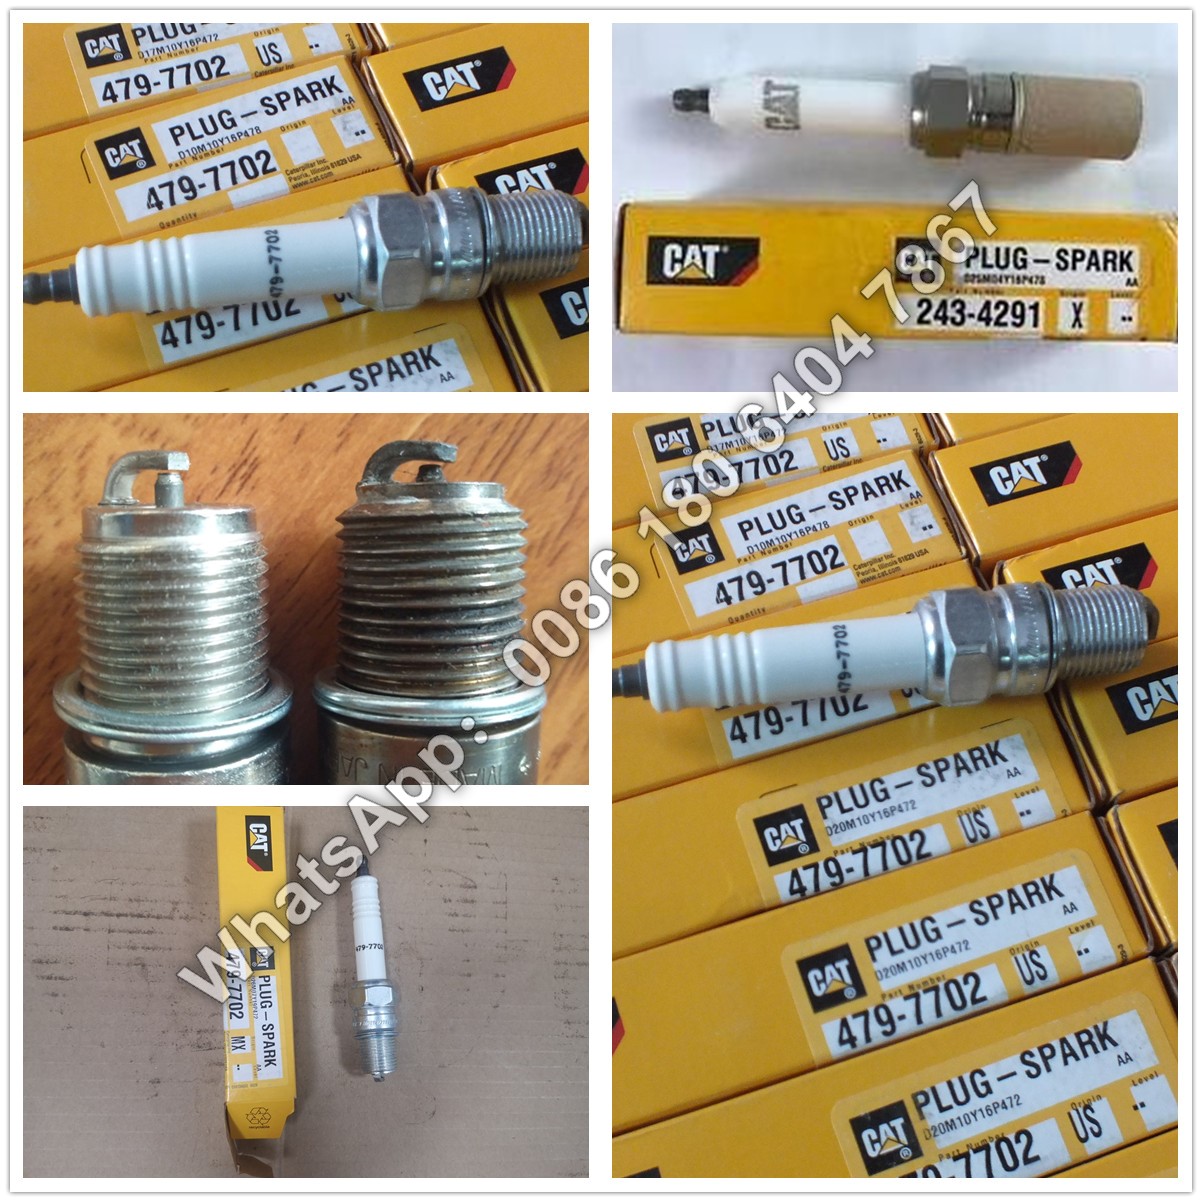 479-7702 industrial spark plug is used for Caterpillar G3500 gas engine, Caterpillar gas engine spare parts